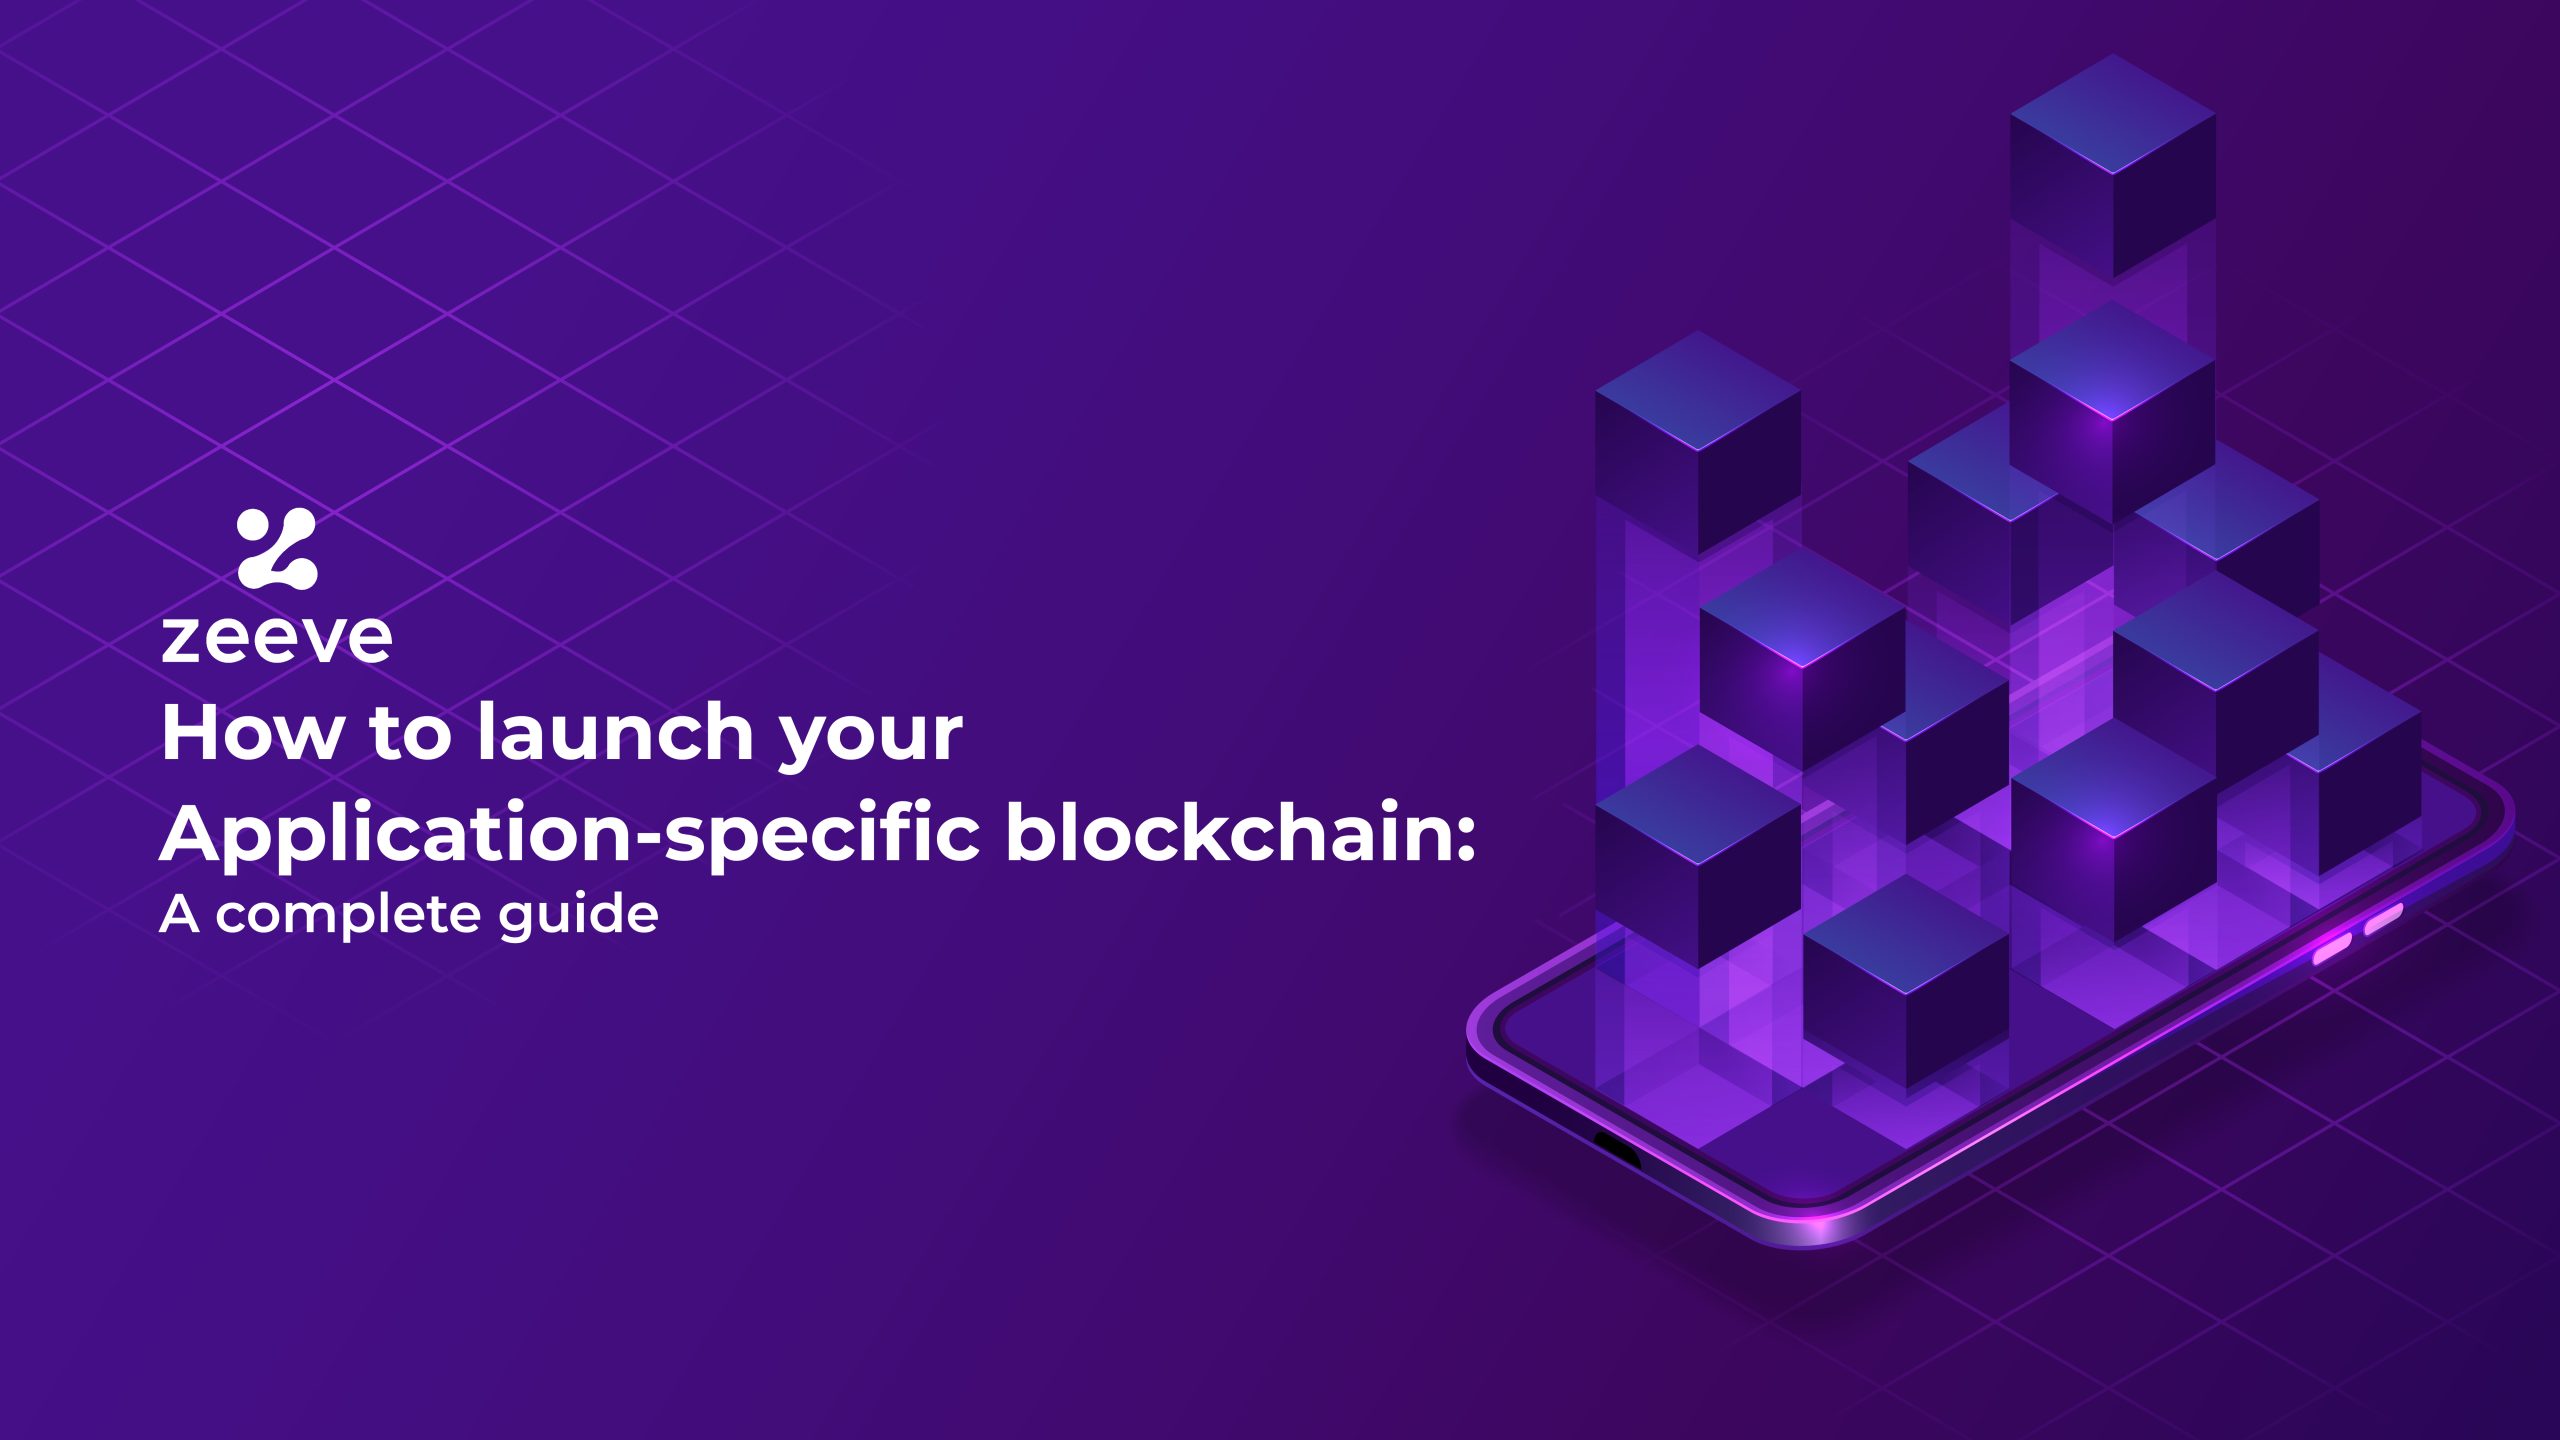 How to launch your Application-specific blockchain